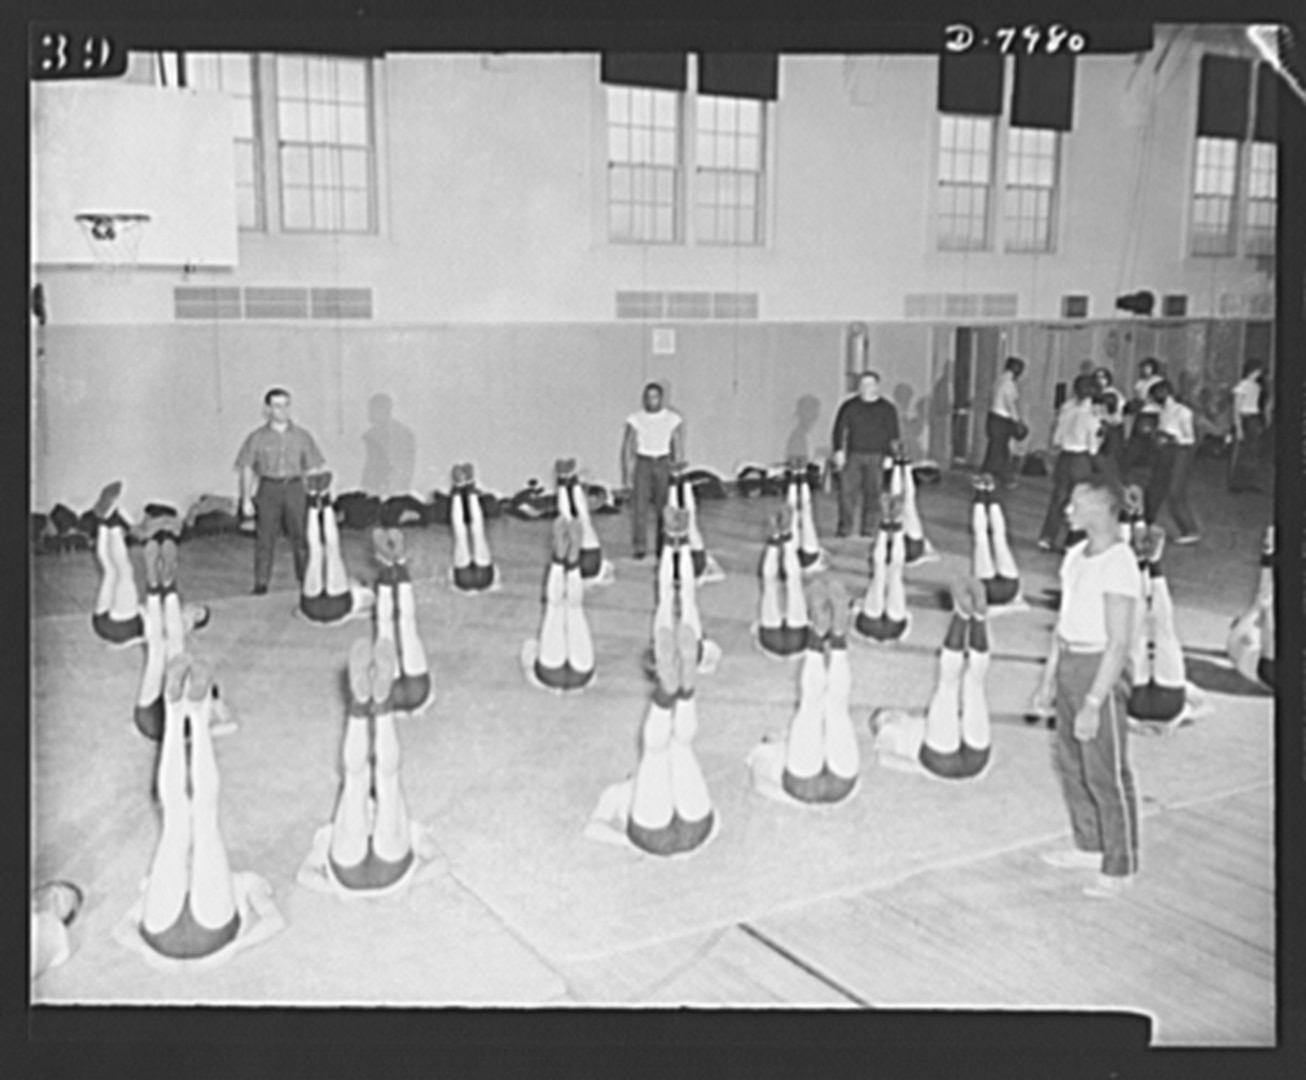 A rare image of Eulace Peacock training Coast Guard recruits at the Manhattan Beach Training Station during World War II. (Library of Congress)